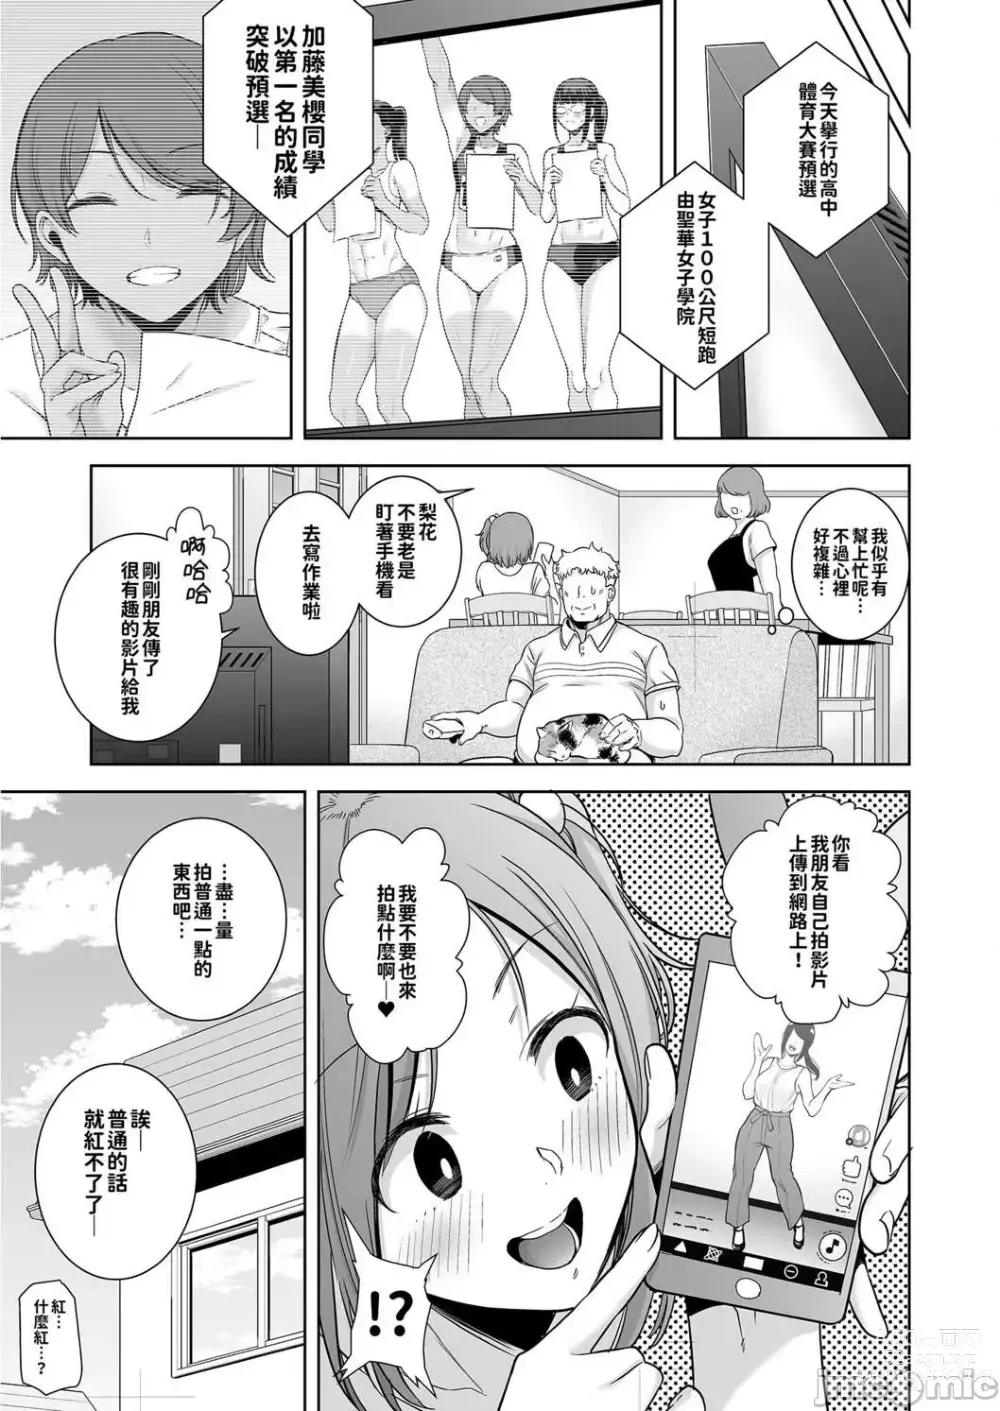 Page 55 of doujinshi Seika Girls Academys Officially Approved Prostitute Man 1 + 2